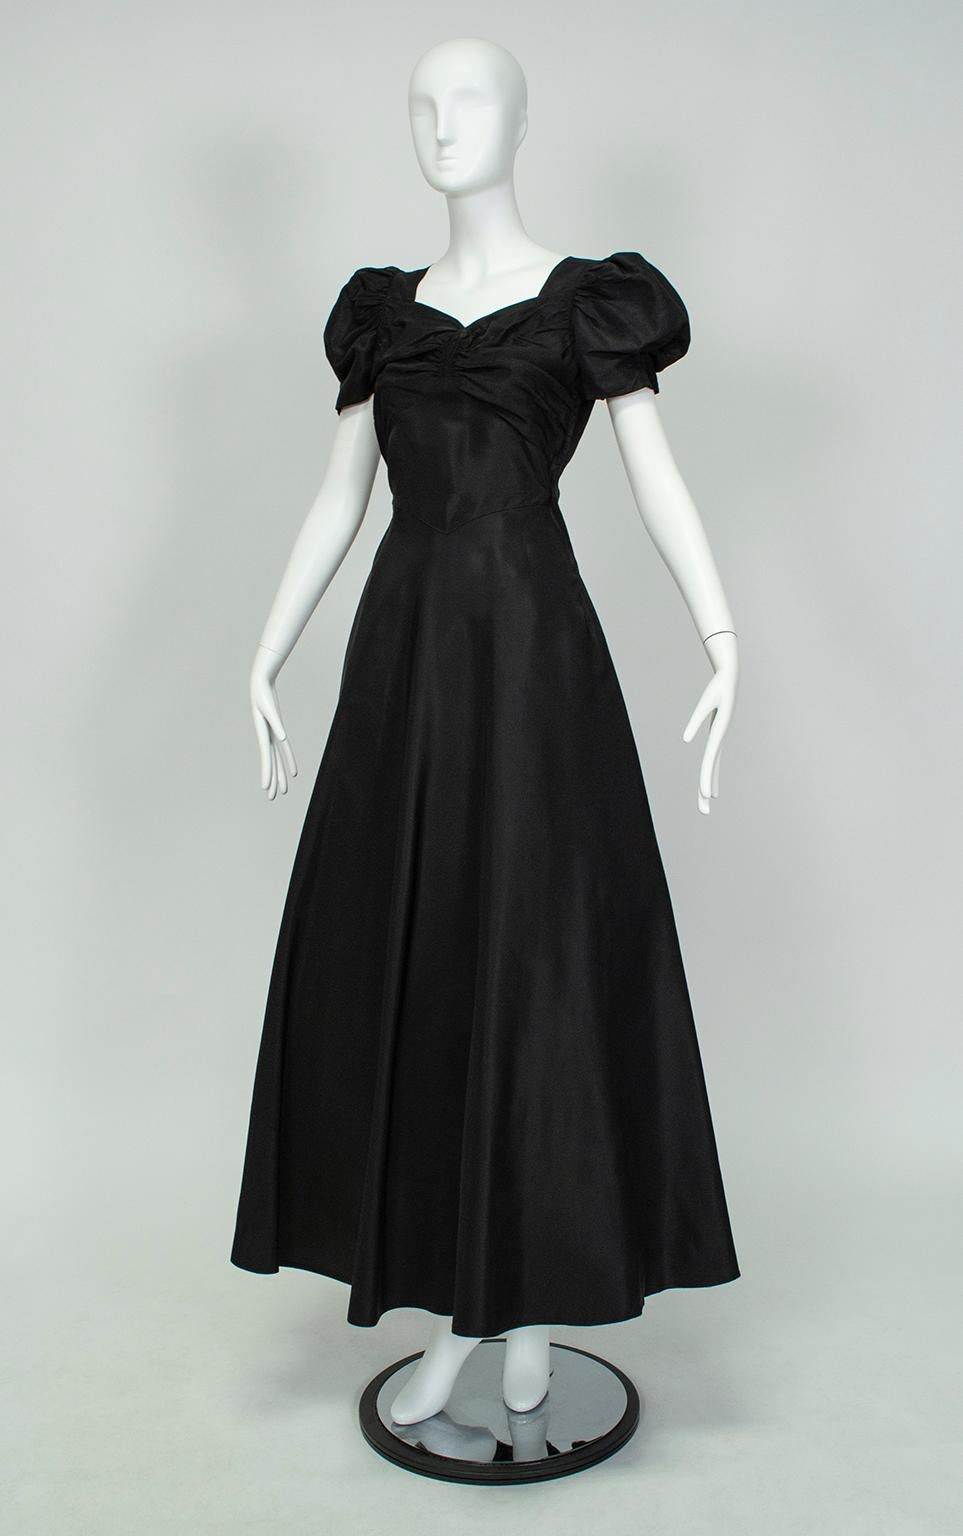 With its cascading ruffle back skirt, puffed sleeves and sweetheart neckline, this gown is like a page out of Walter Plunkett’s designs for “Gone with the Wind” or Adrian’s for “Letty Lynton”. Girlish and feminine thanks to its cut, but also serious